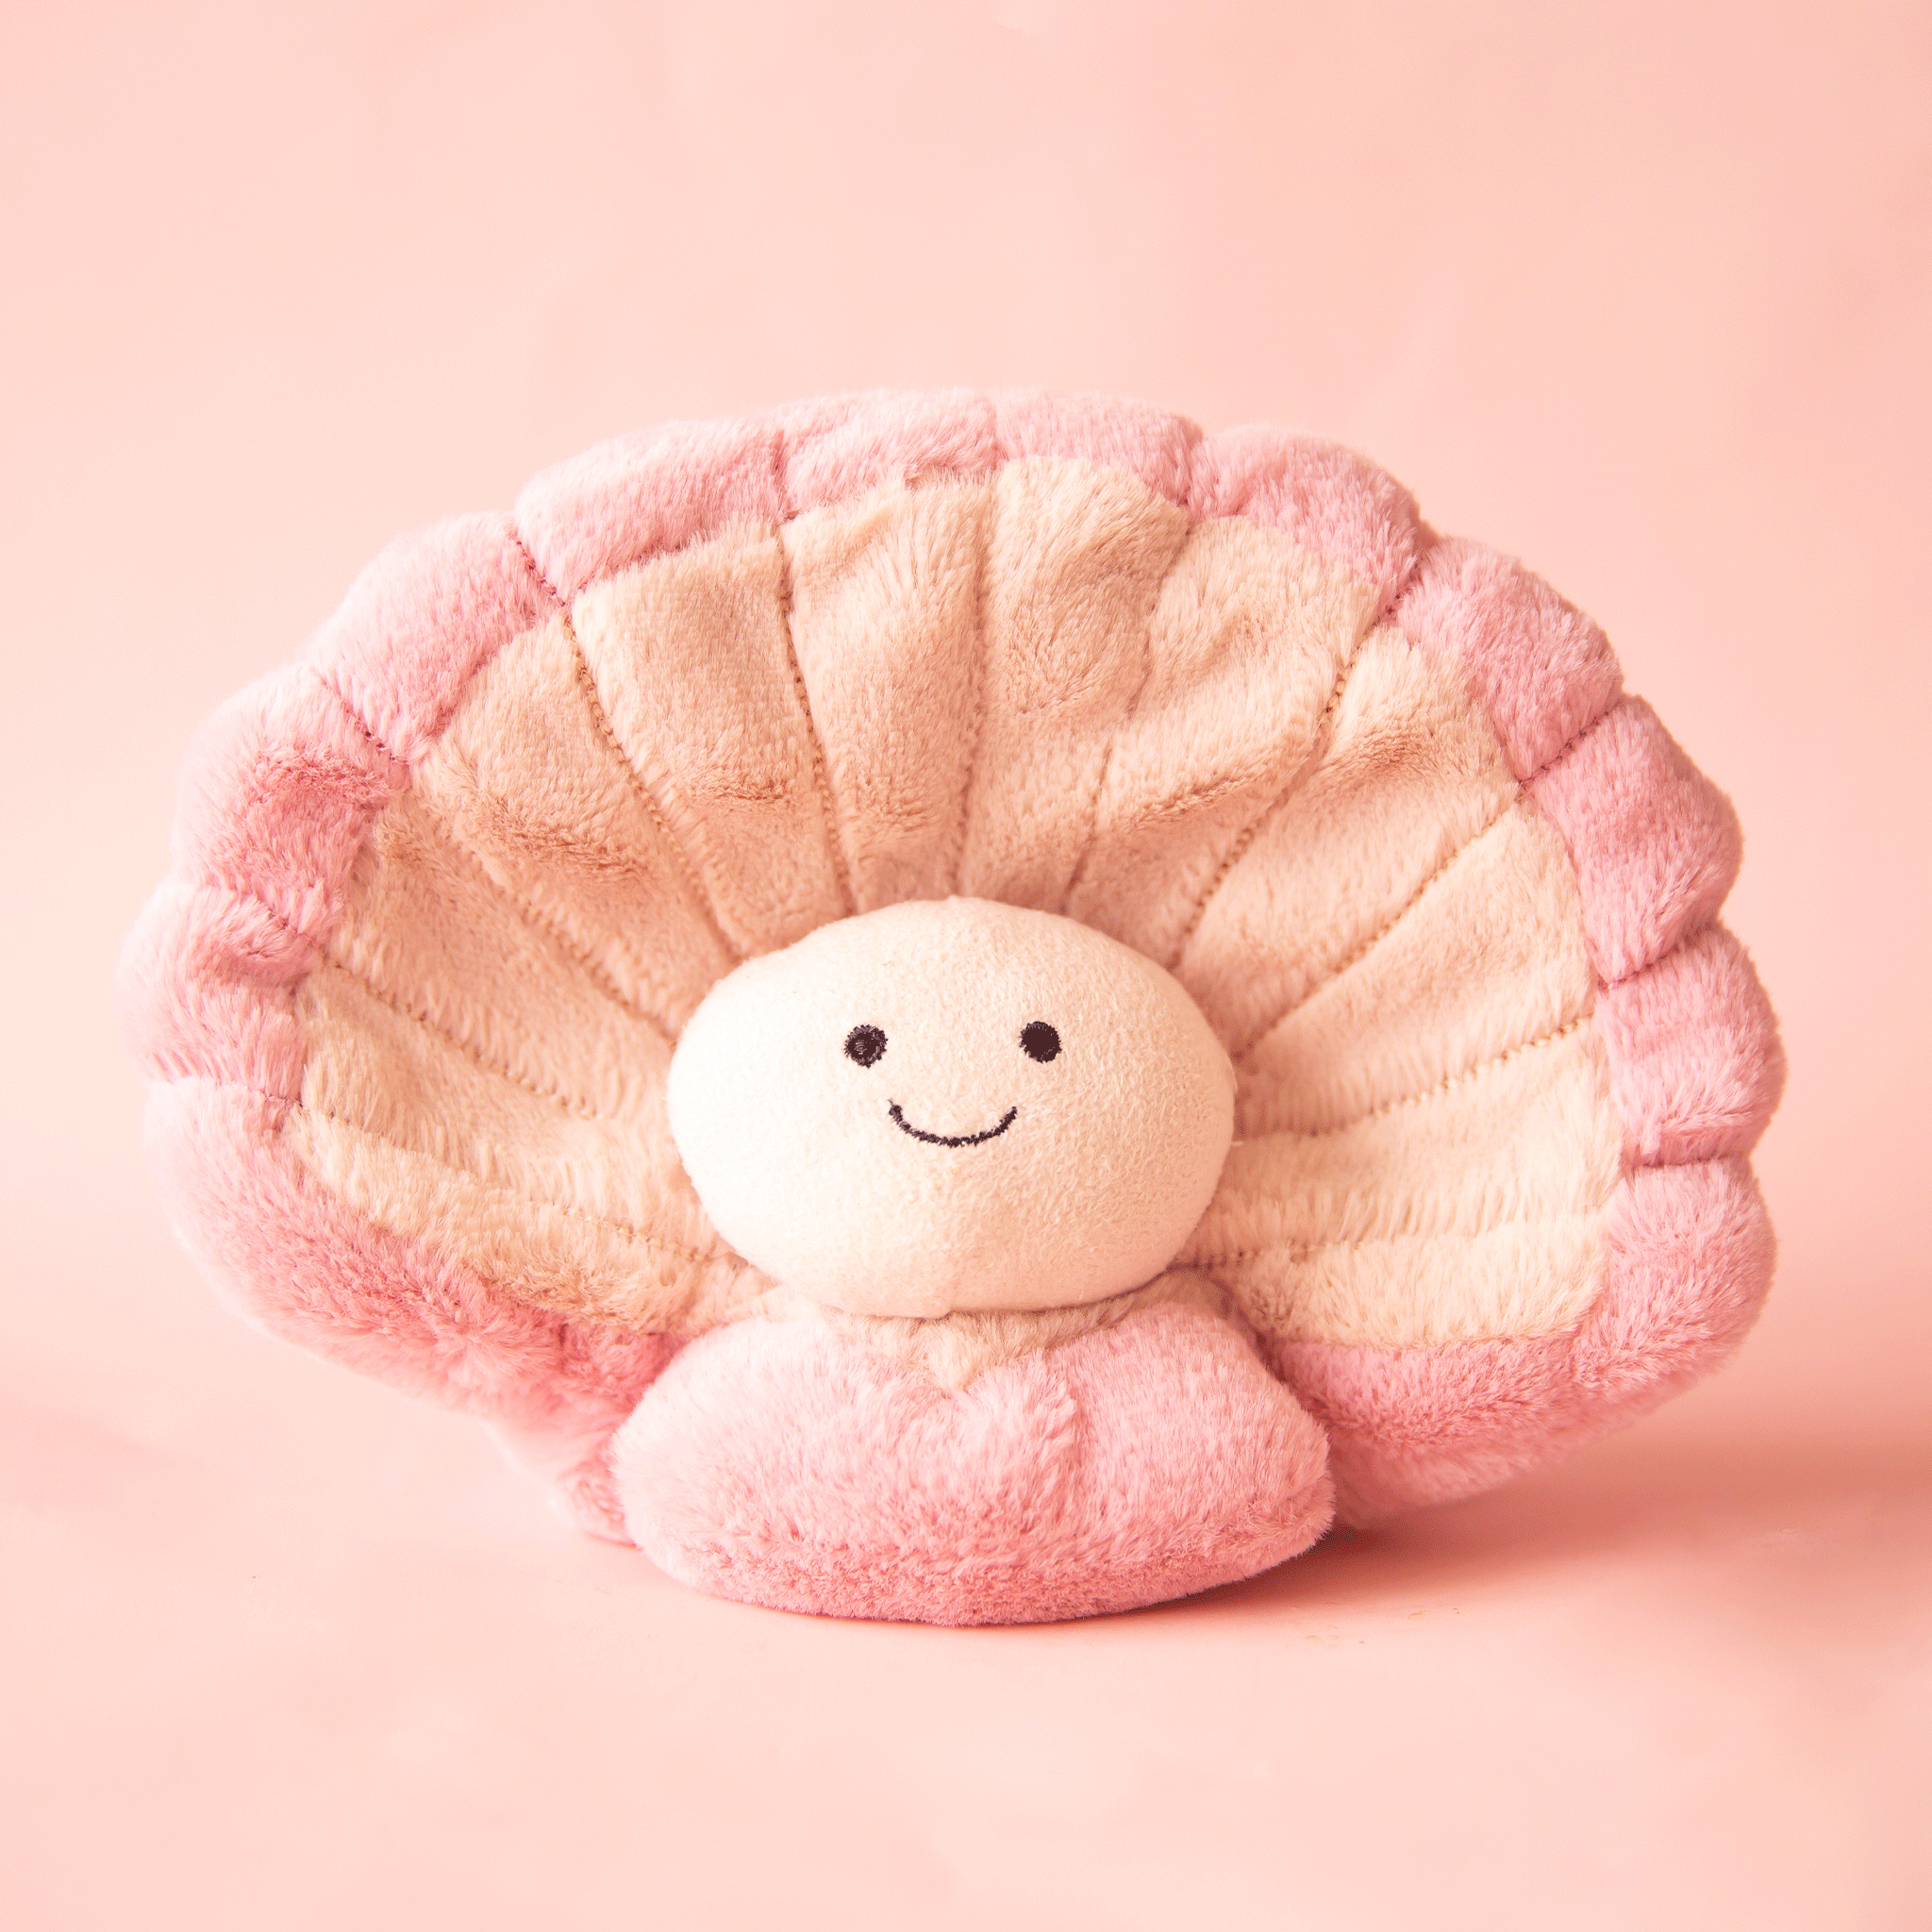 On a pink background is a clam shaped stuffed toy with a smiling cream colored pearl nestled inside of the pink and tan clam shaped shell. 